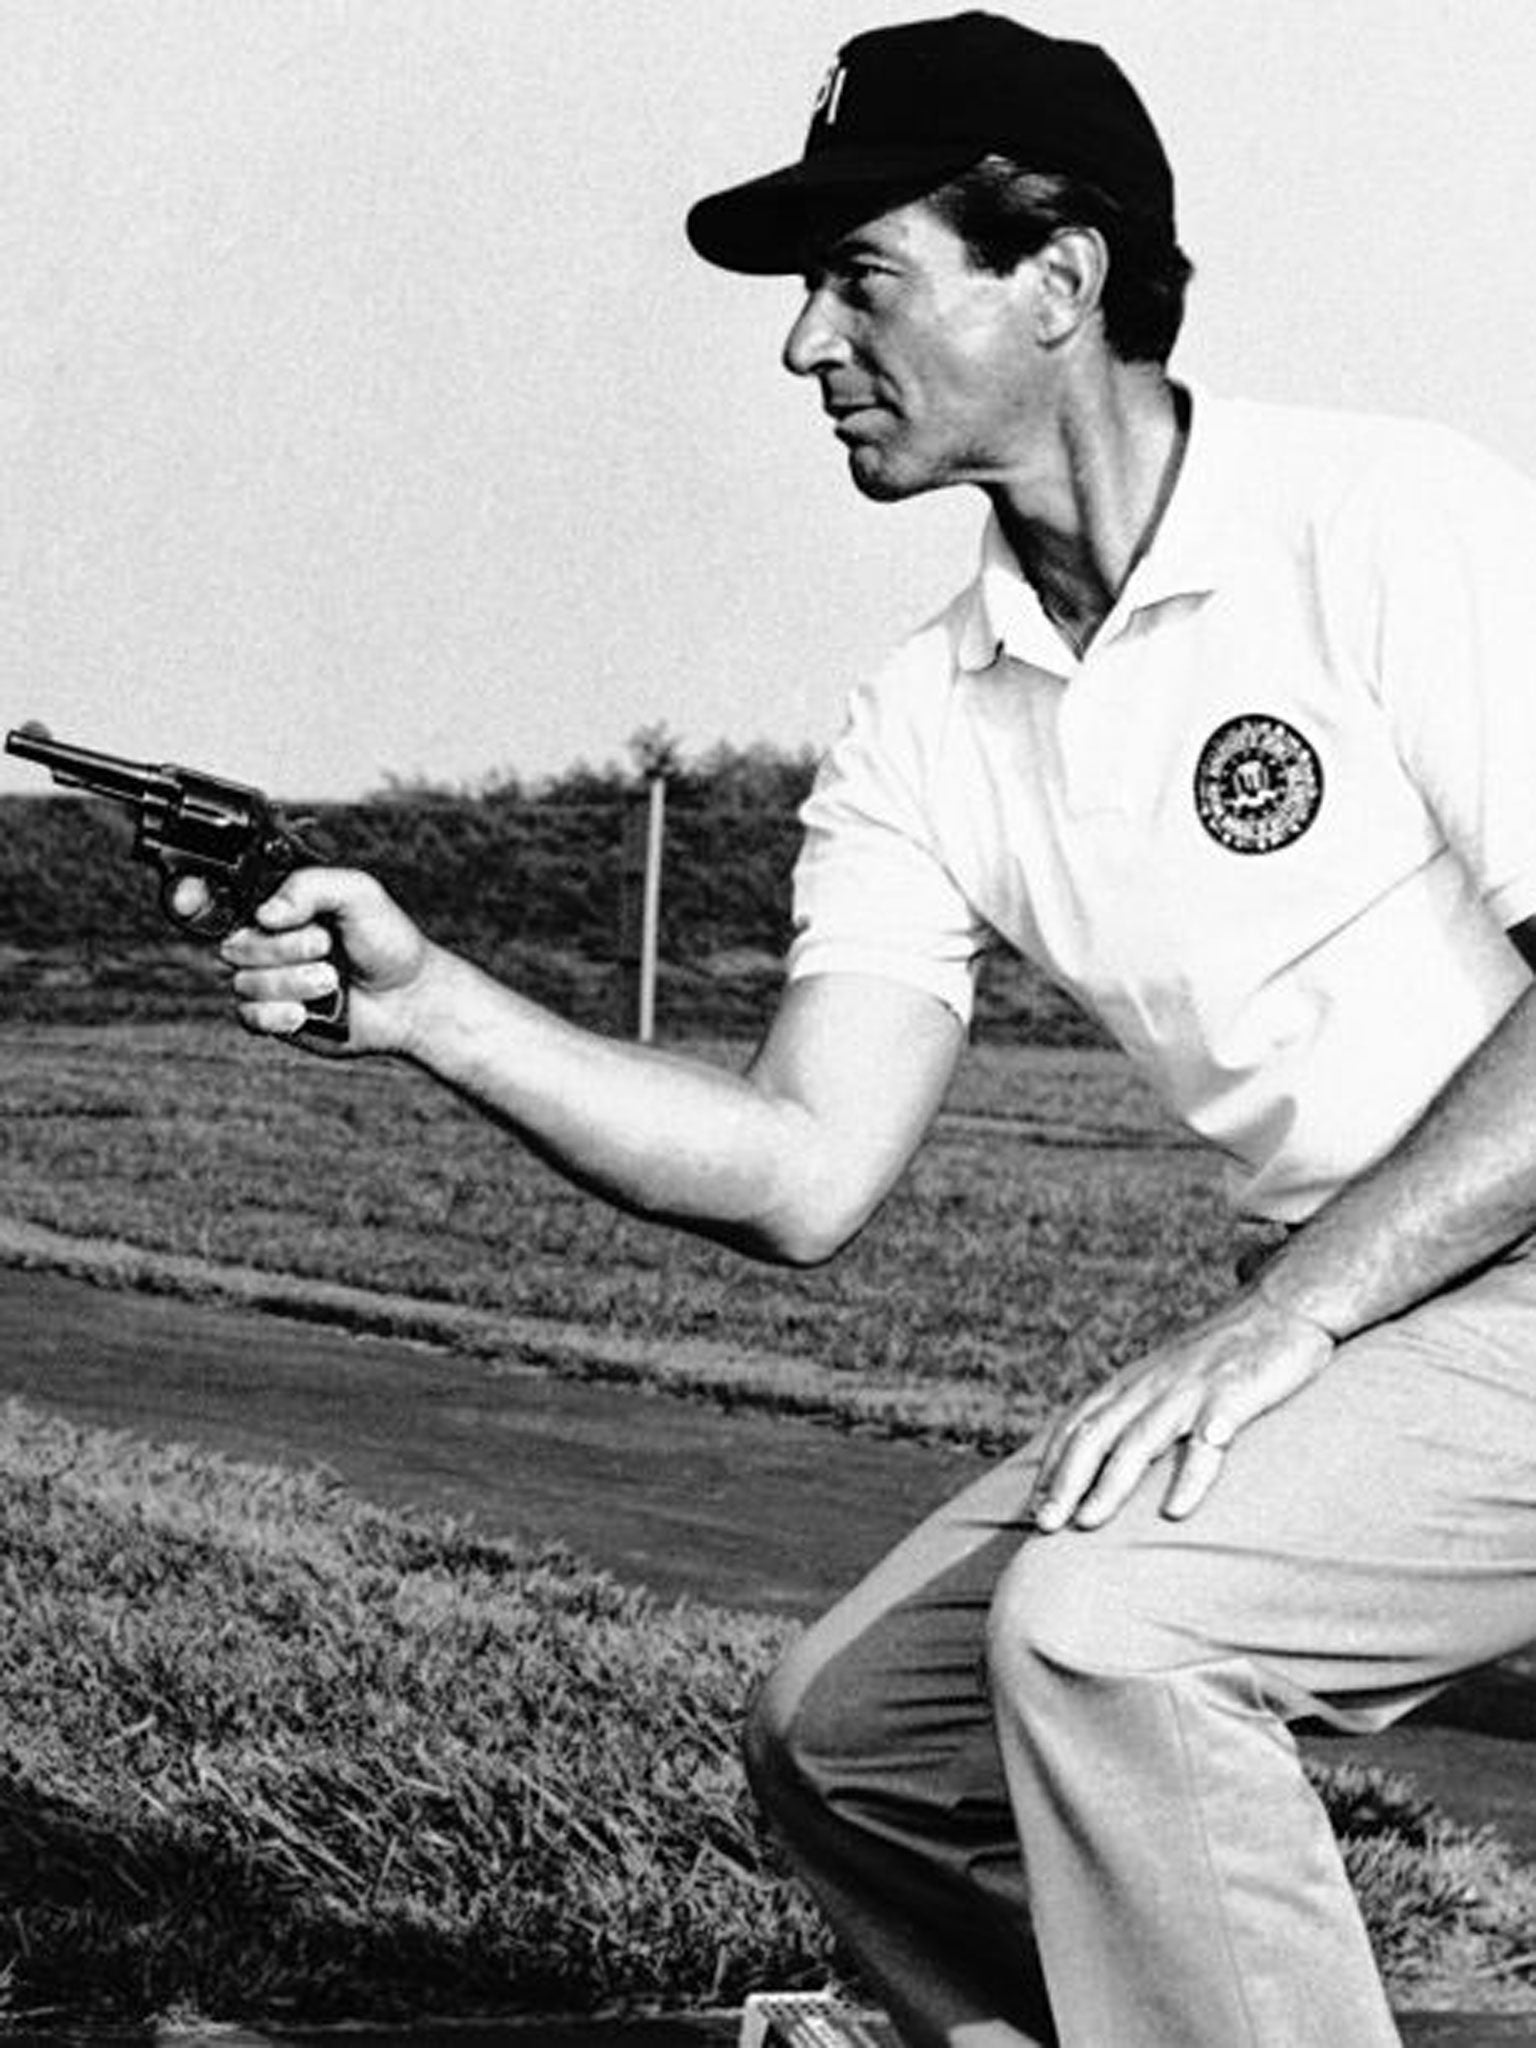 Zimbalist Jr in 1965 during a pistol training session given by the real FBI